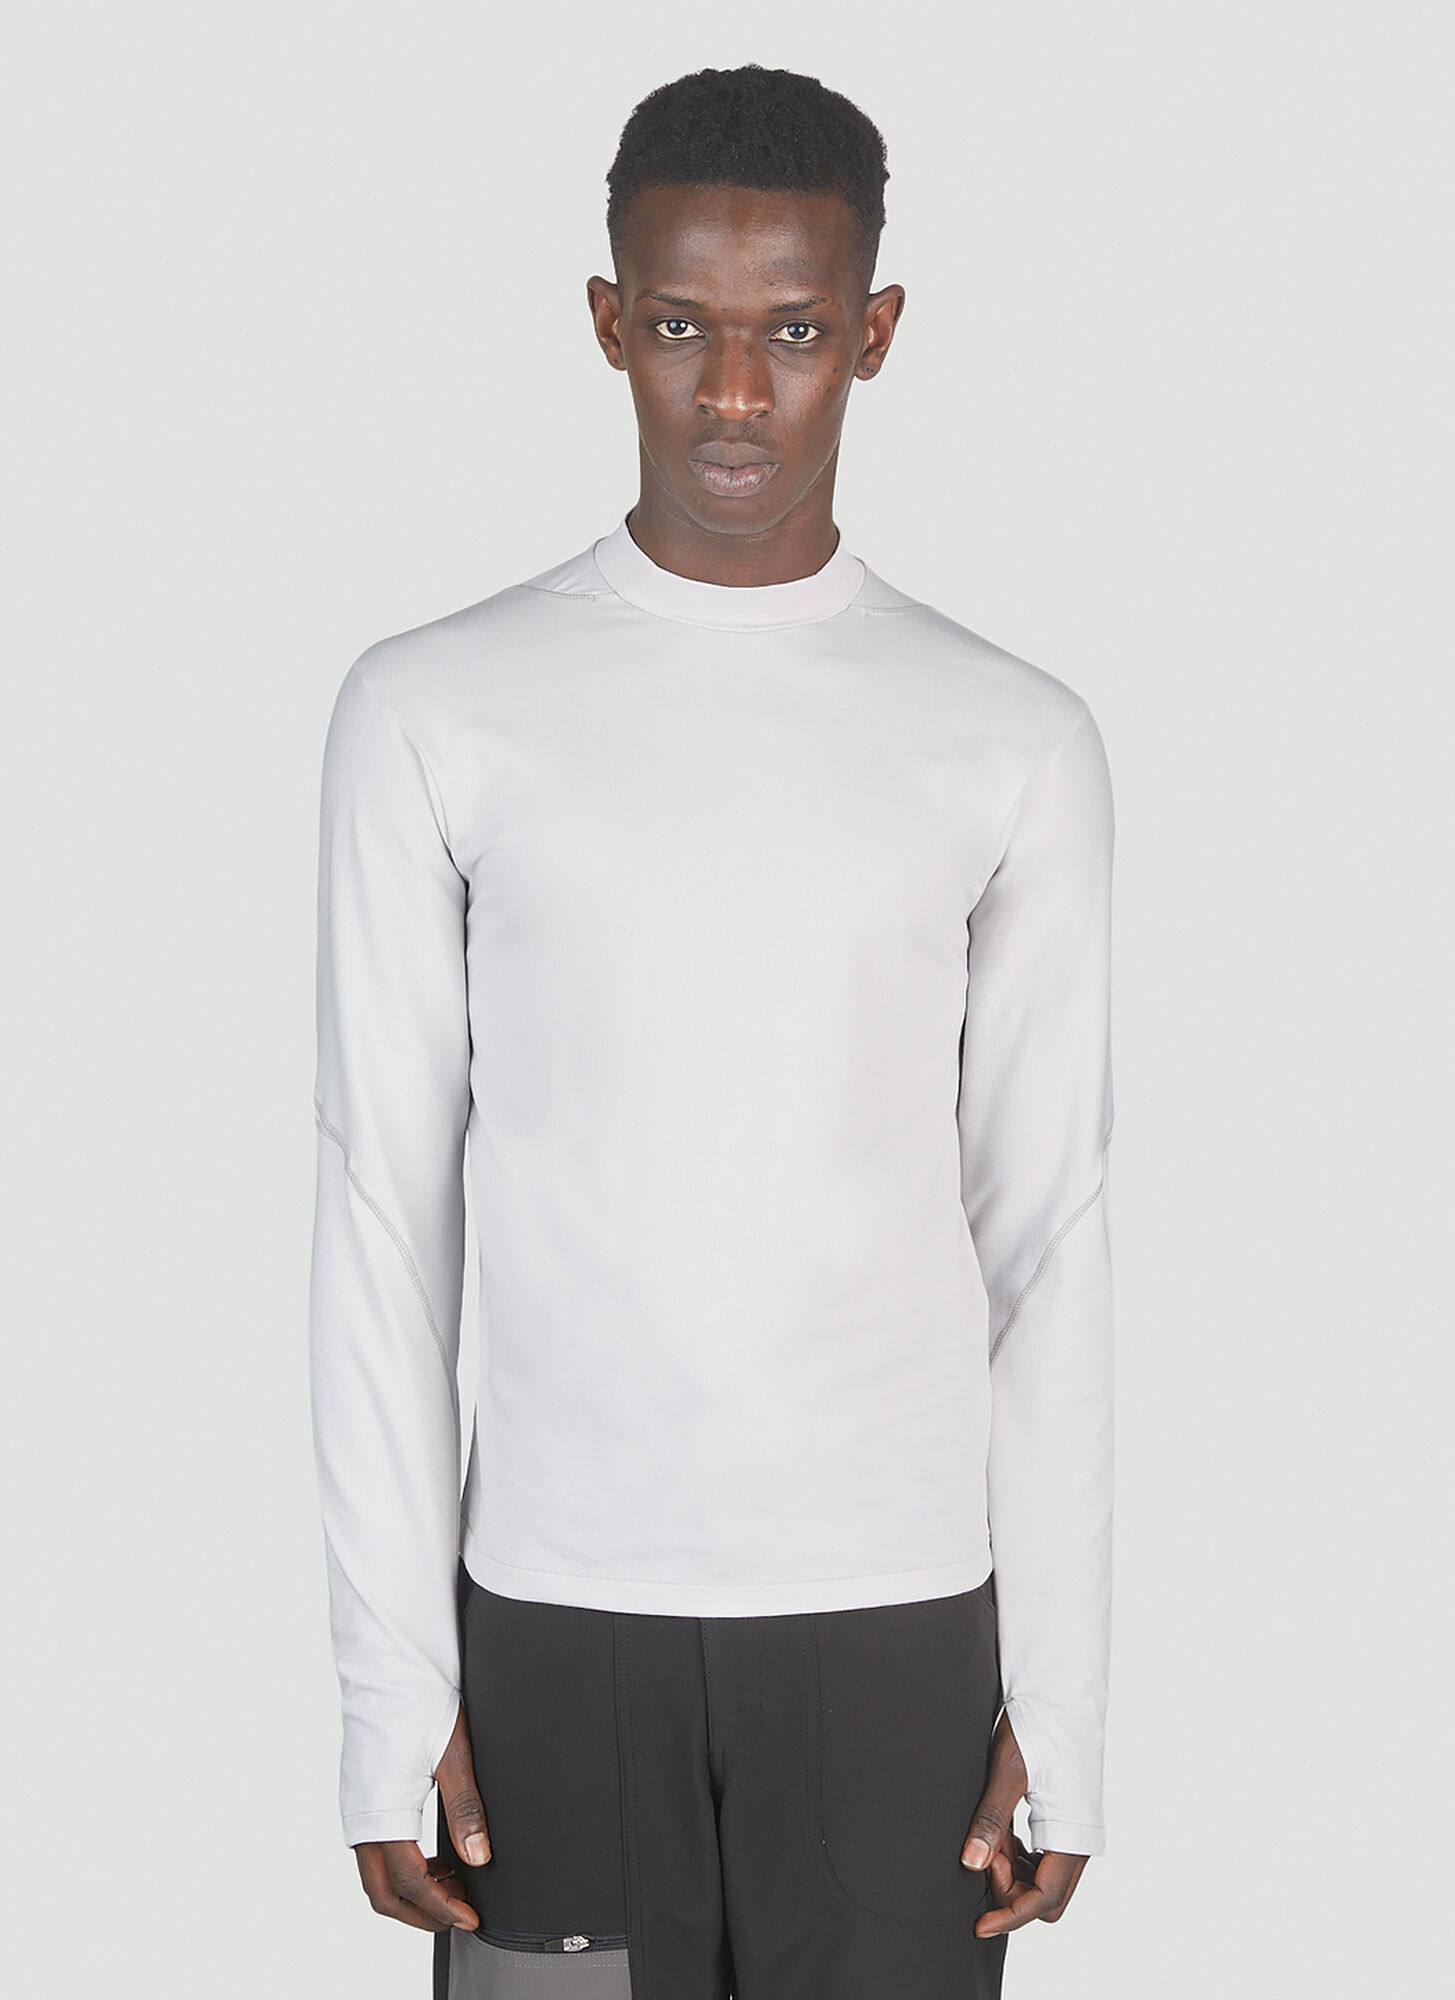 Post Archive Faction (paf) 5.0 Long Sleeve Top In Lilac